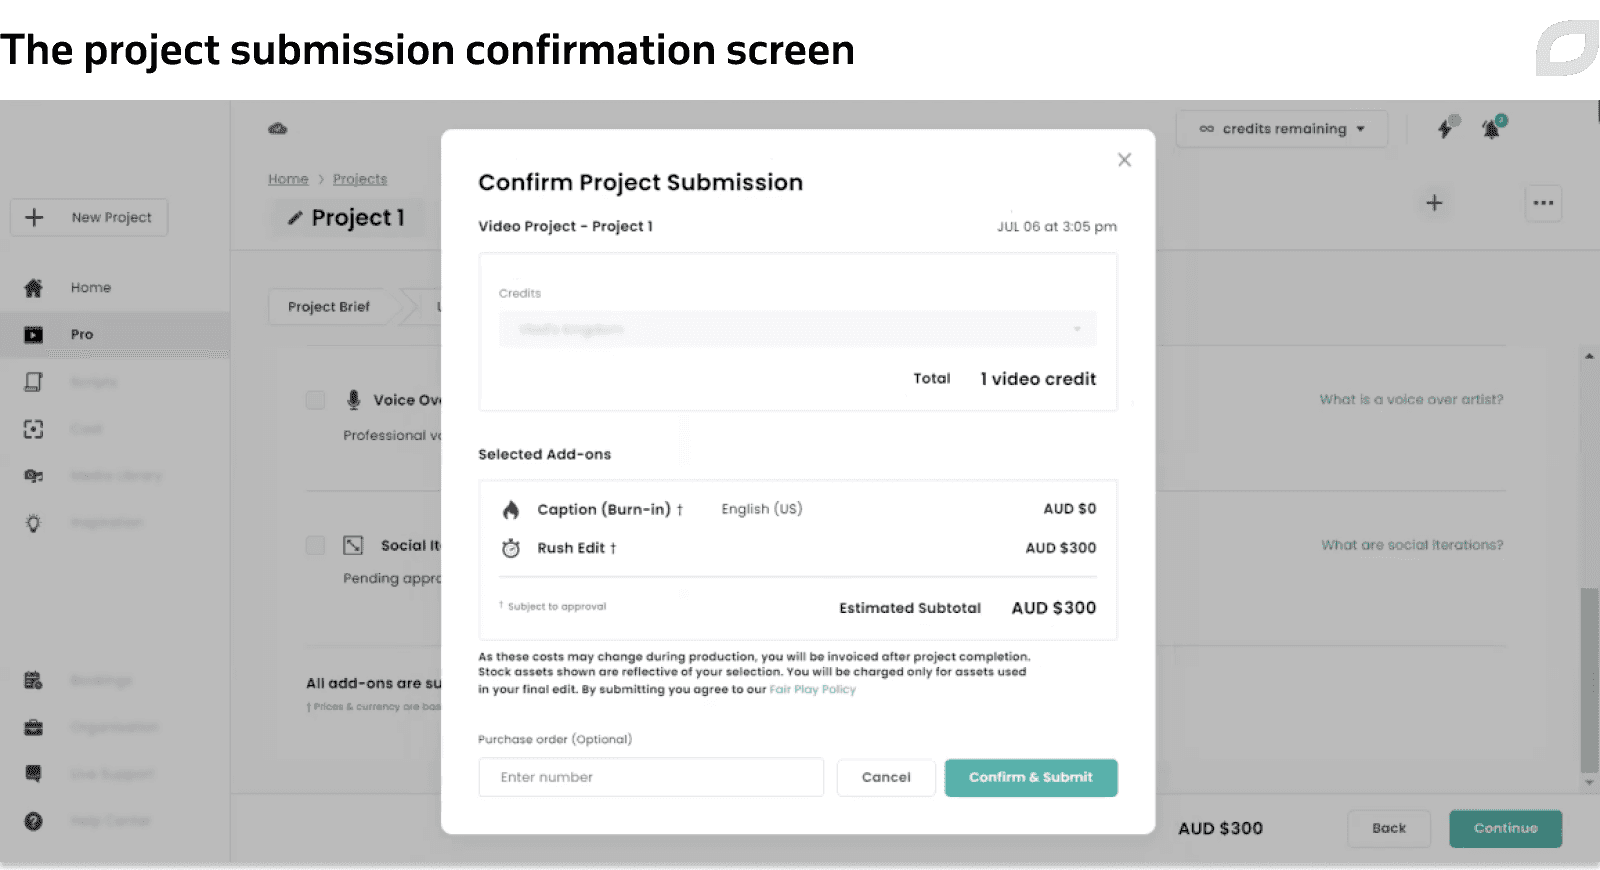 The project submission confirmation screen